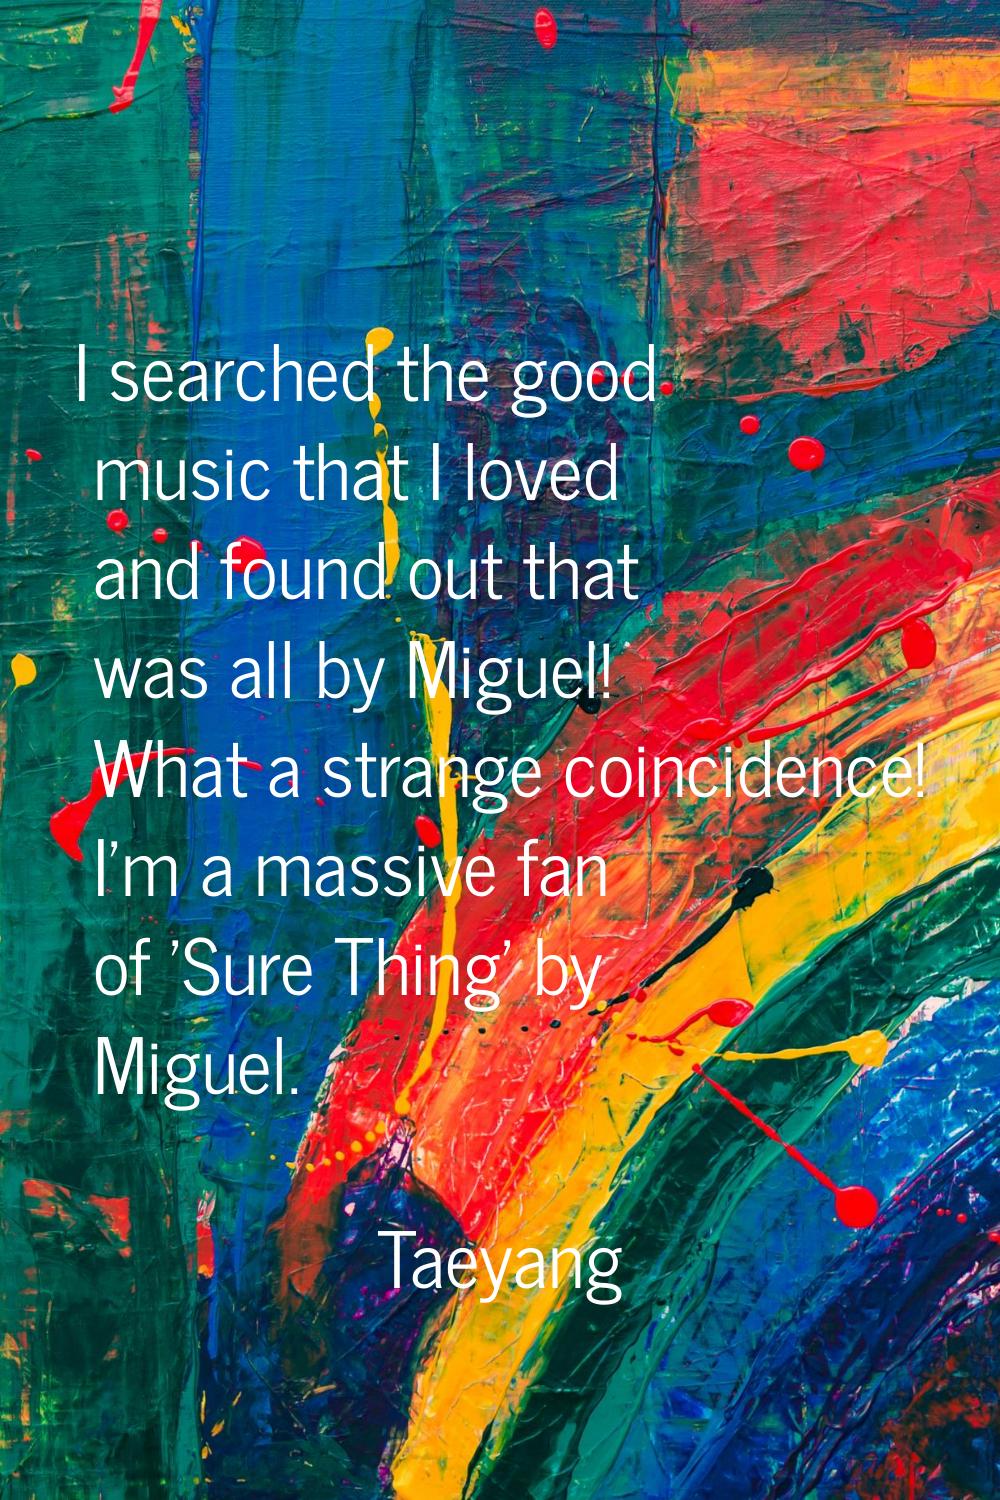 I searched the good music that I loved and found out that was all by Miguel! What a strange coincid